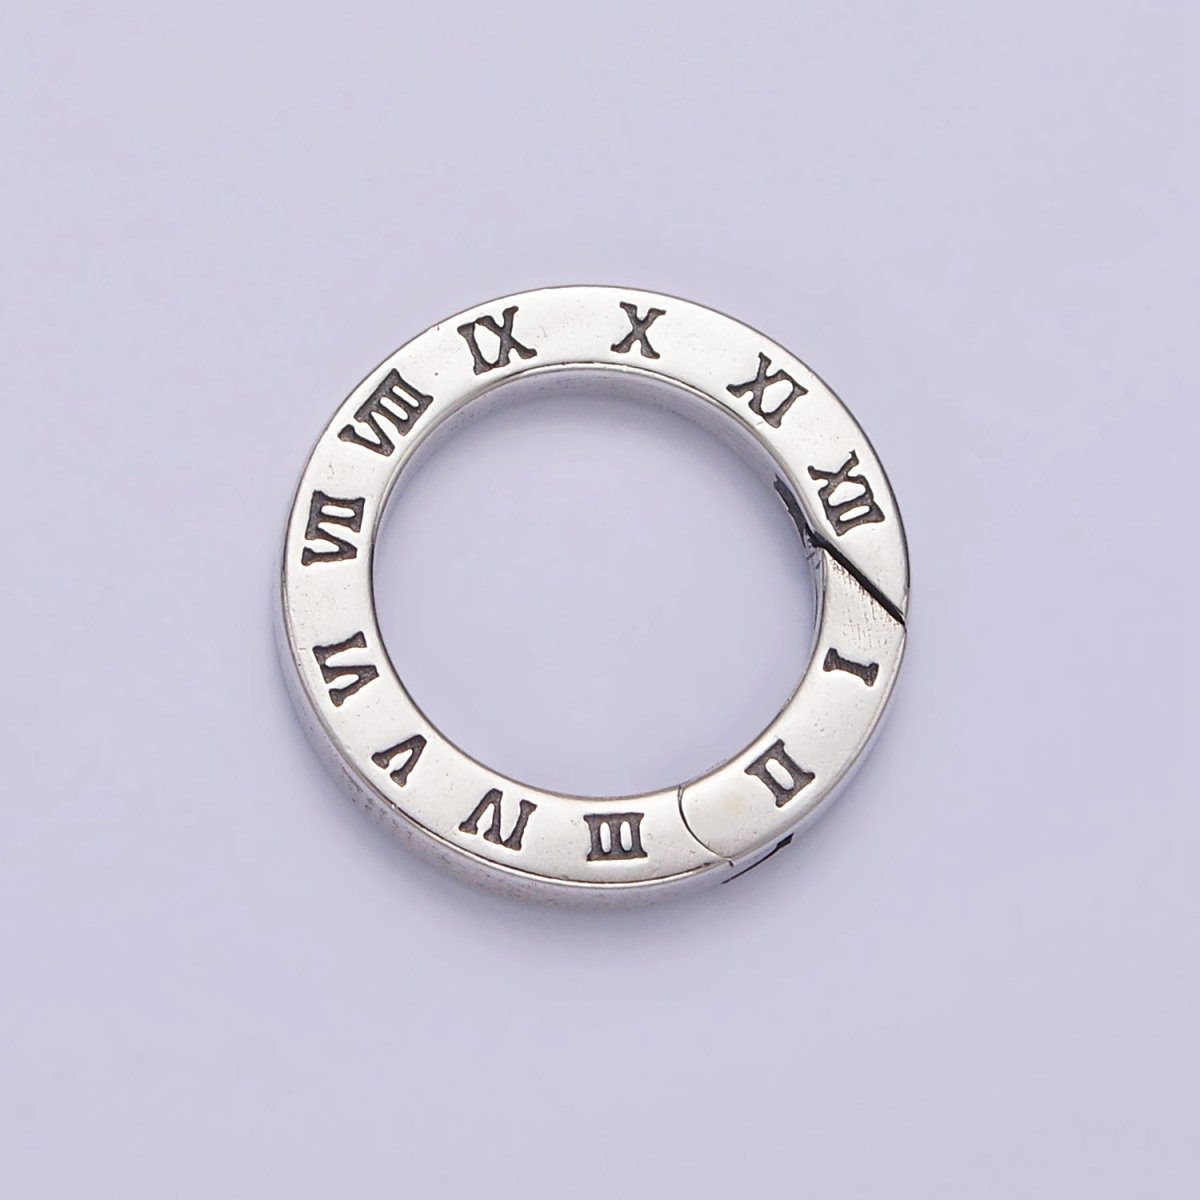 S925 Sterling Silver Time Clock Engraved Push Round Spring Gate Jewelry Supply | SL-369. - DLUXCA